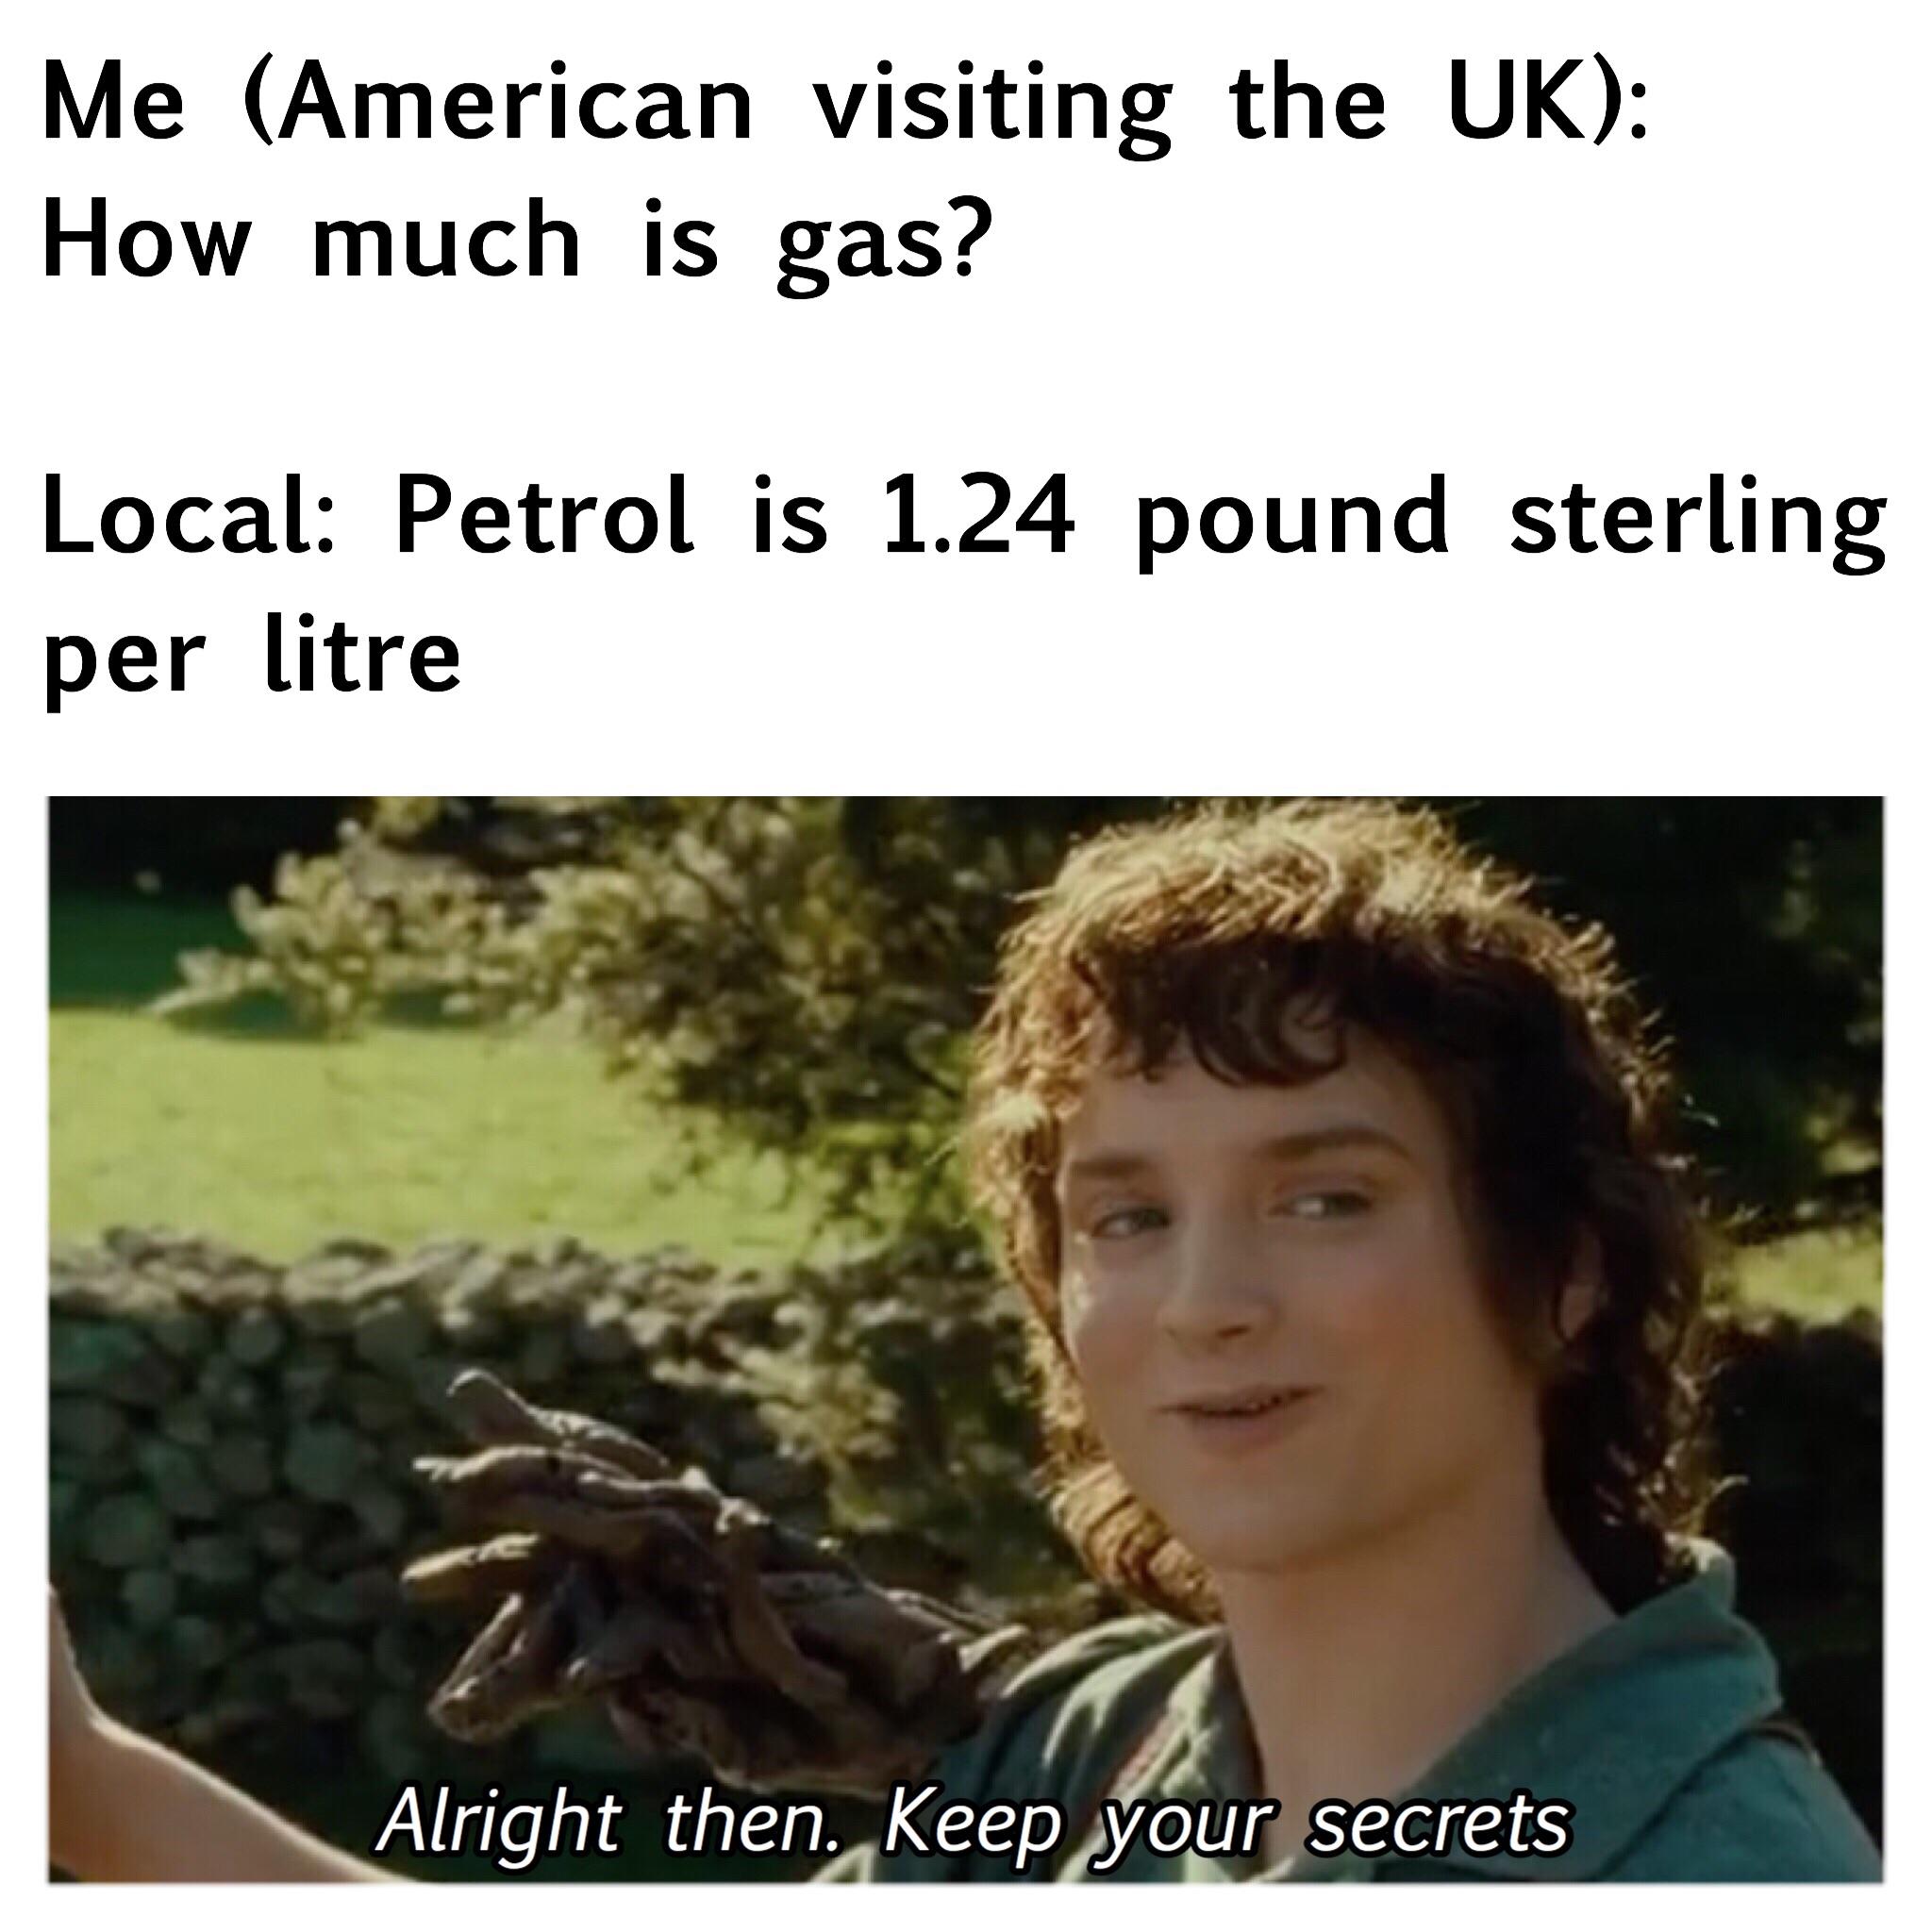 memes - alright then keep your secrets - Me American visiting the Uk How much is gas? Local Petrol is 1.24 pound sterling per litre Alright then. Keep your secrets